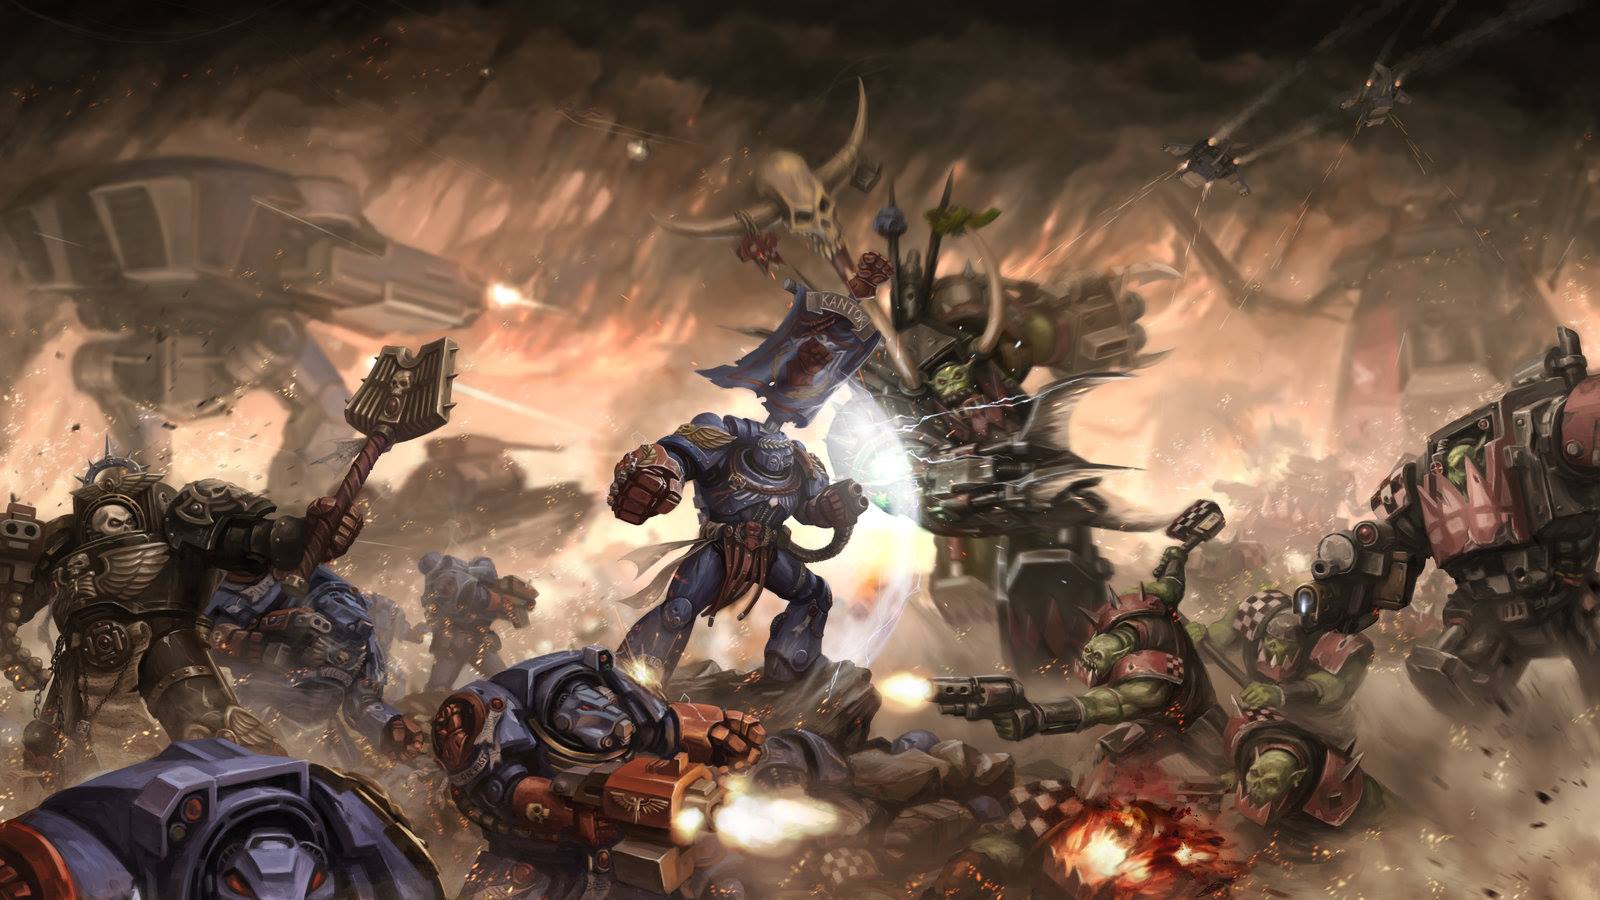 Space Marines Vs Orks Battle Wallpaper 1600x900 px Free Download